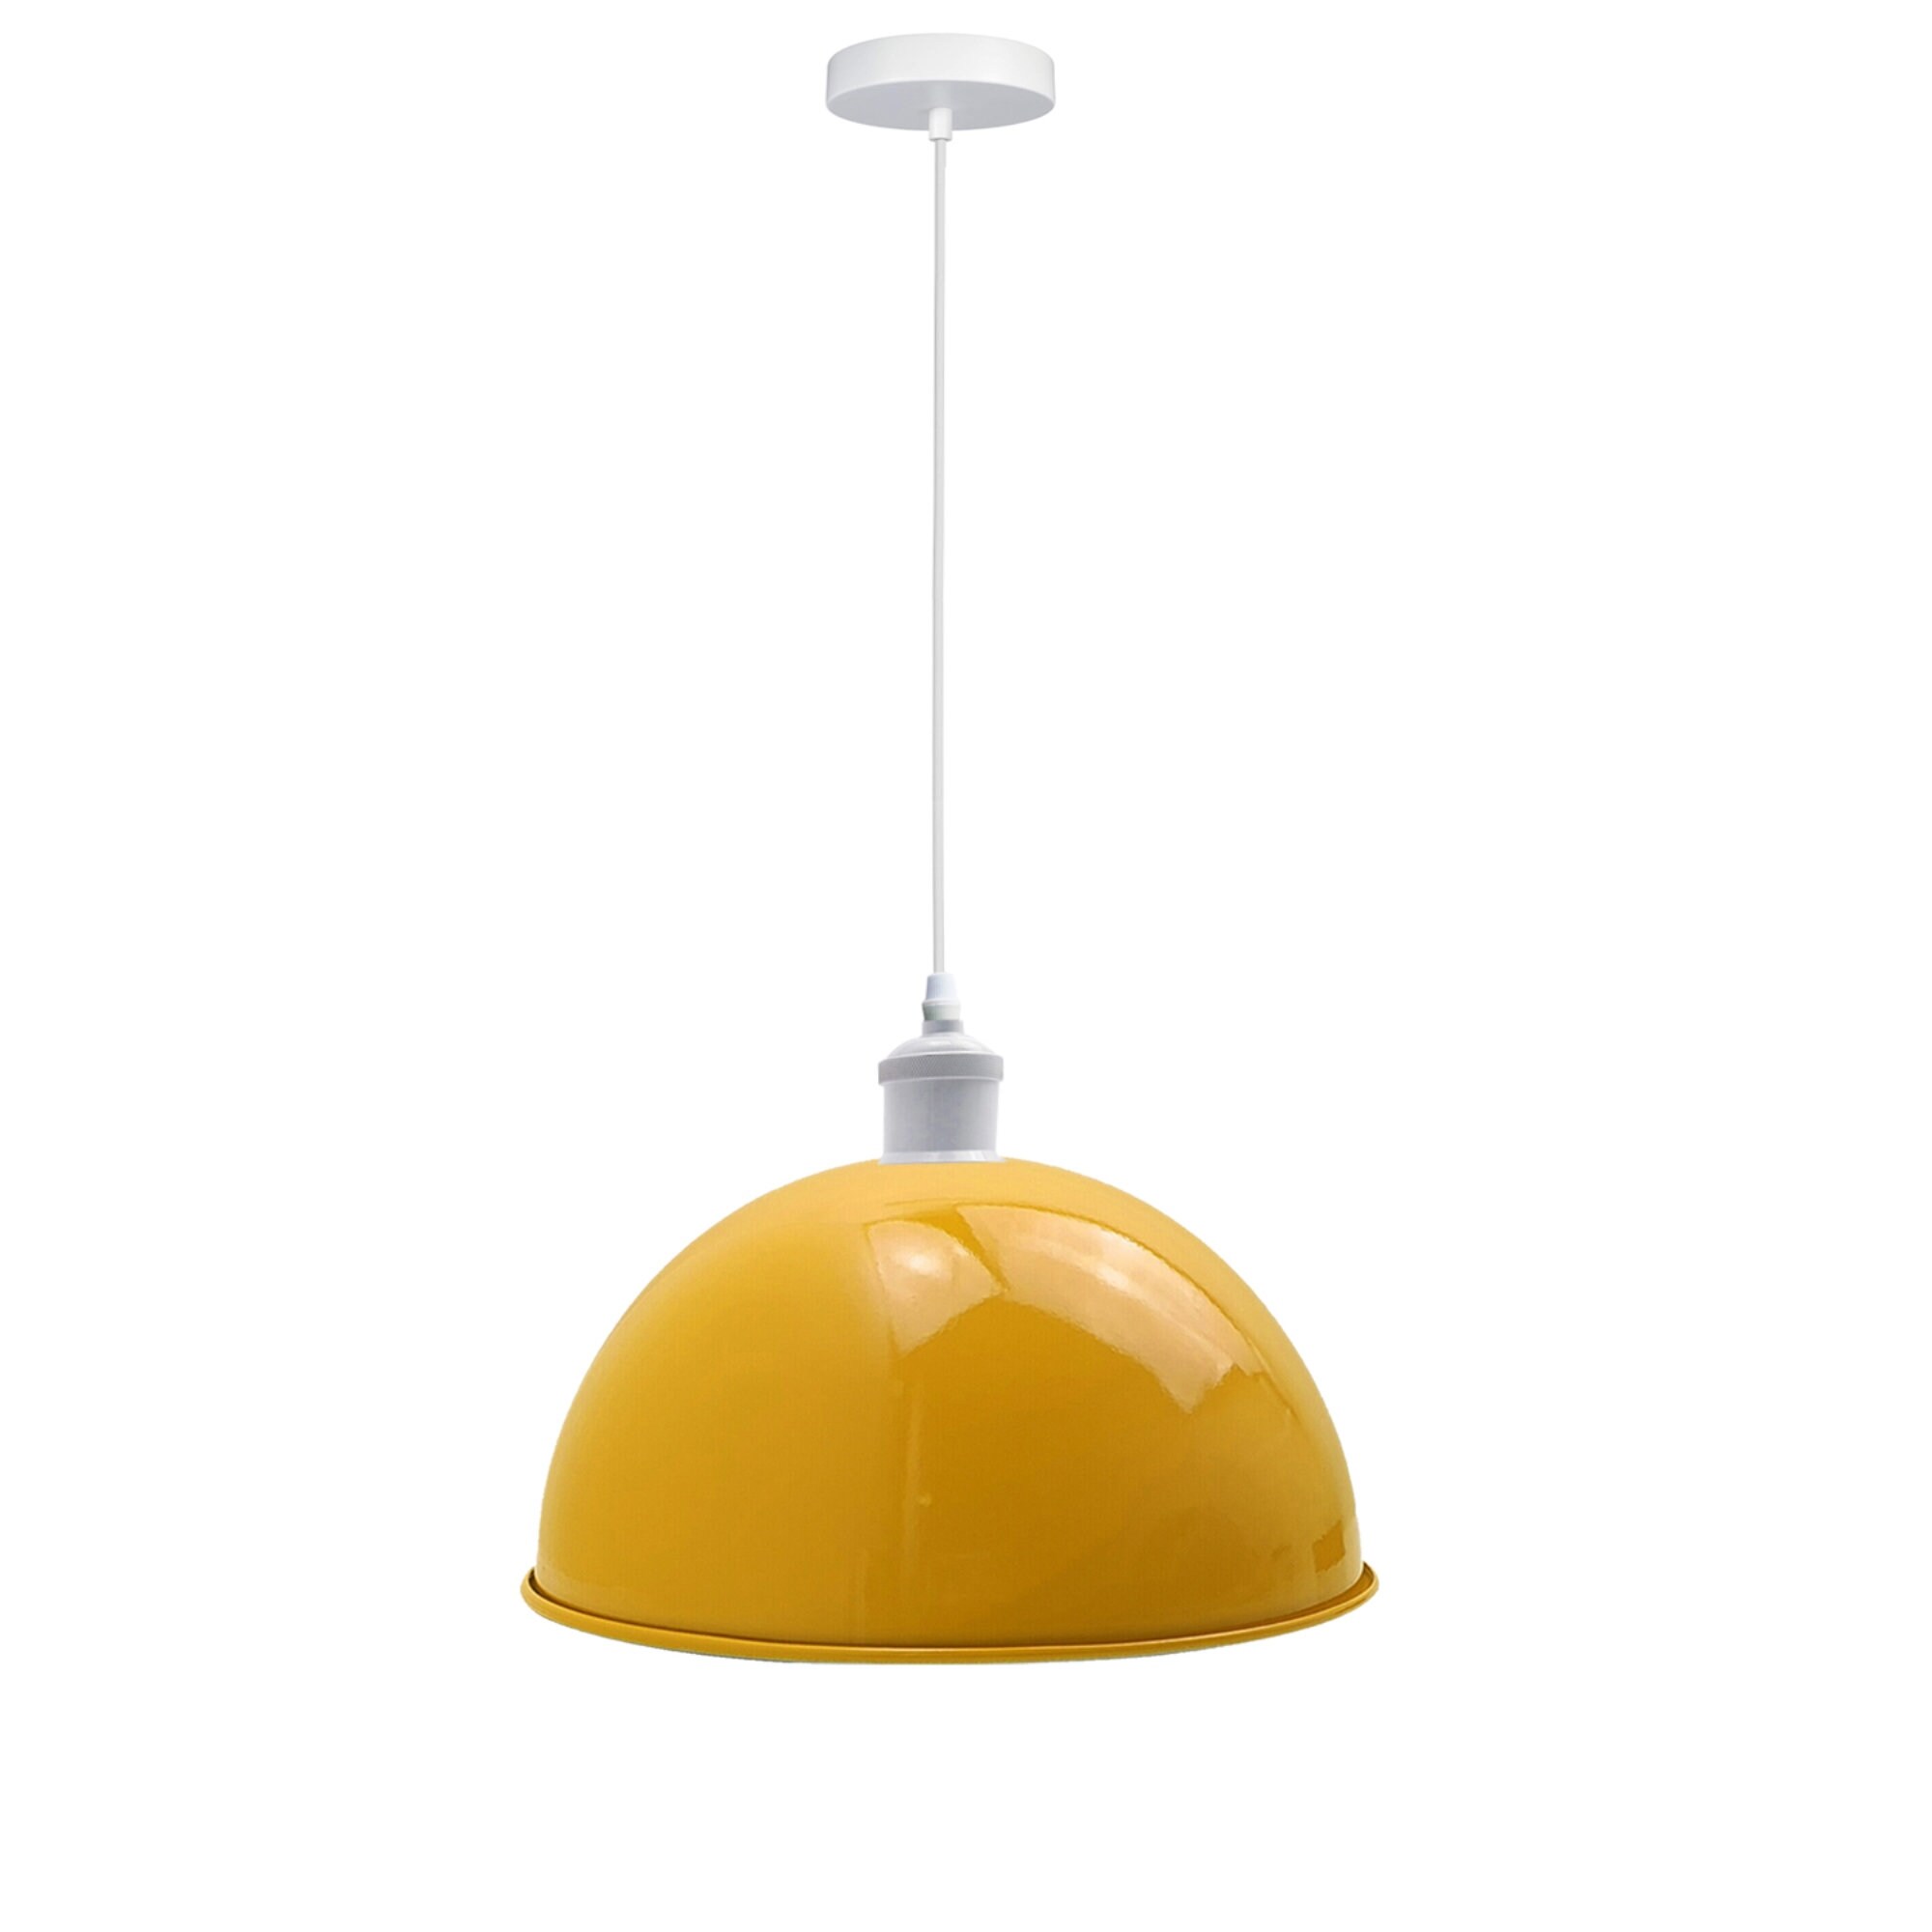 Colour Light Shade Vintage Industrial Ceiling Pendant Modern Colour Lampshade 